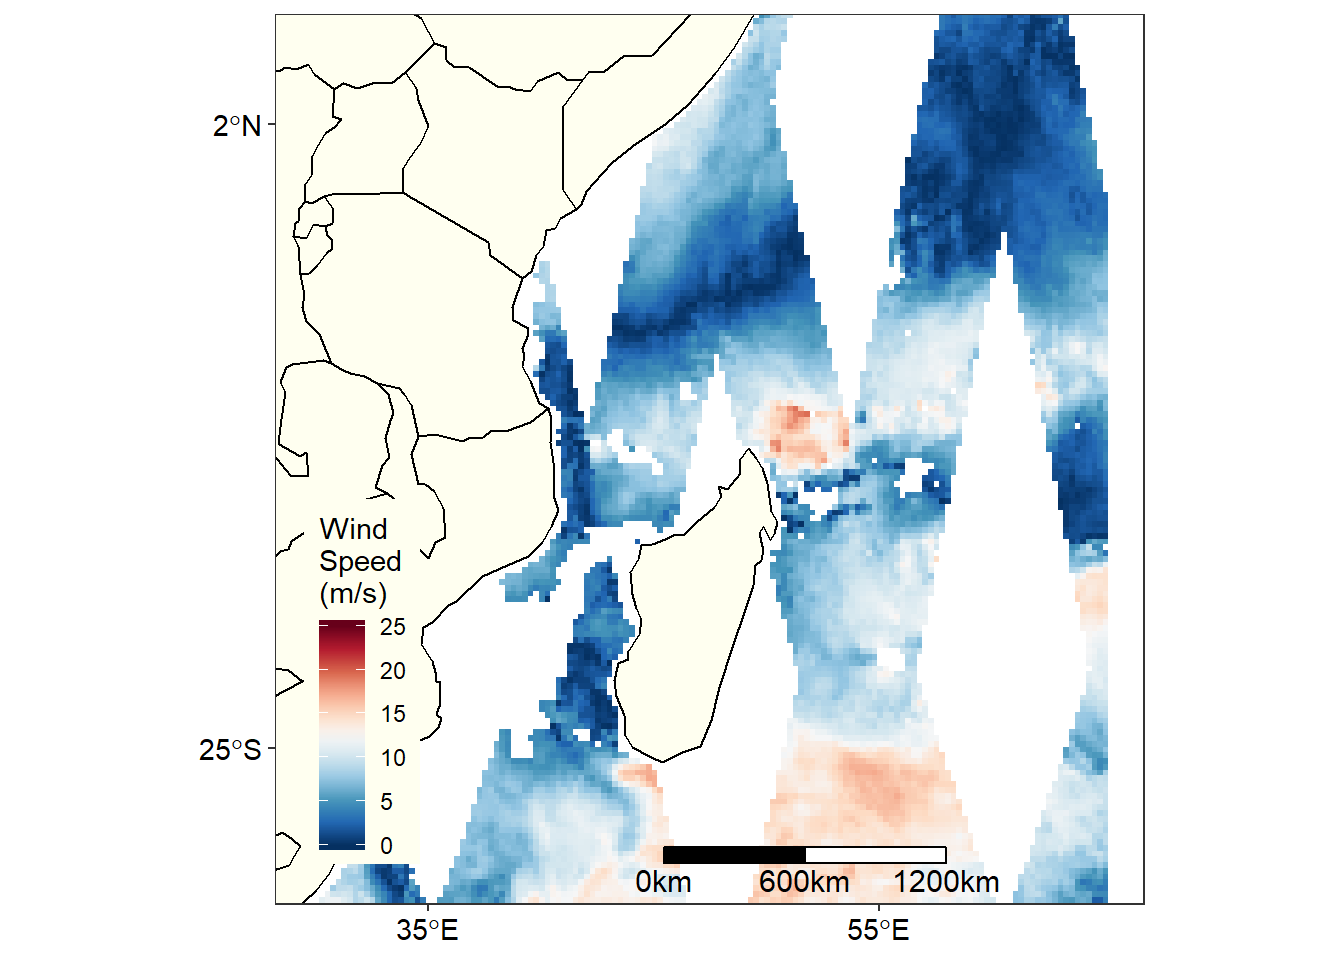 Map showing Wind speed of January 1, 2018 in the tropical Indina Ocean